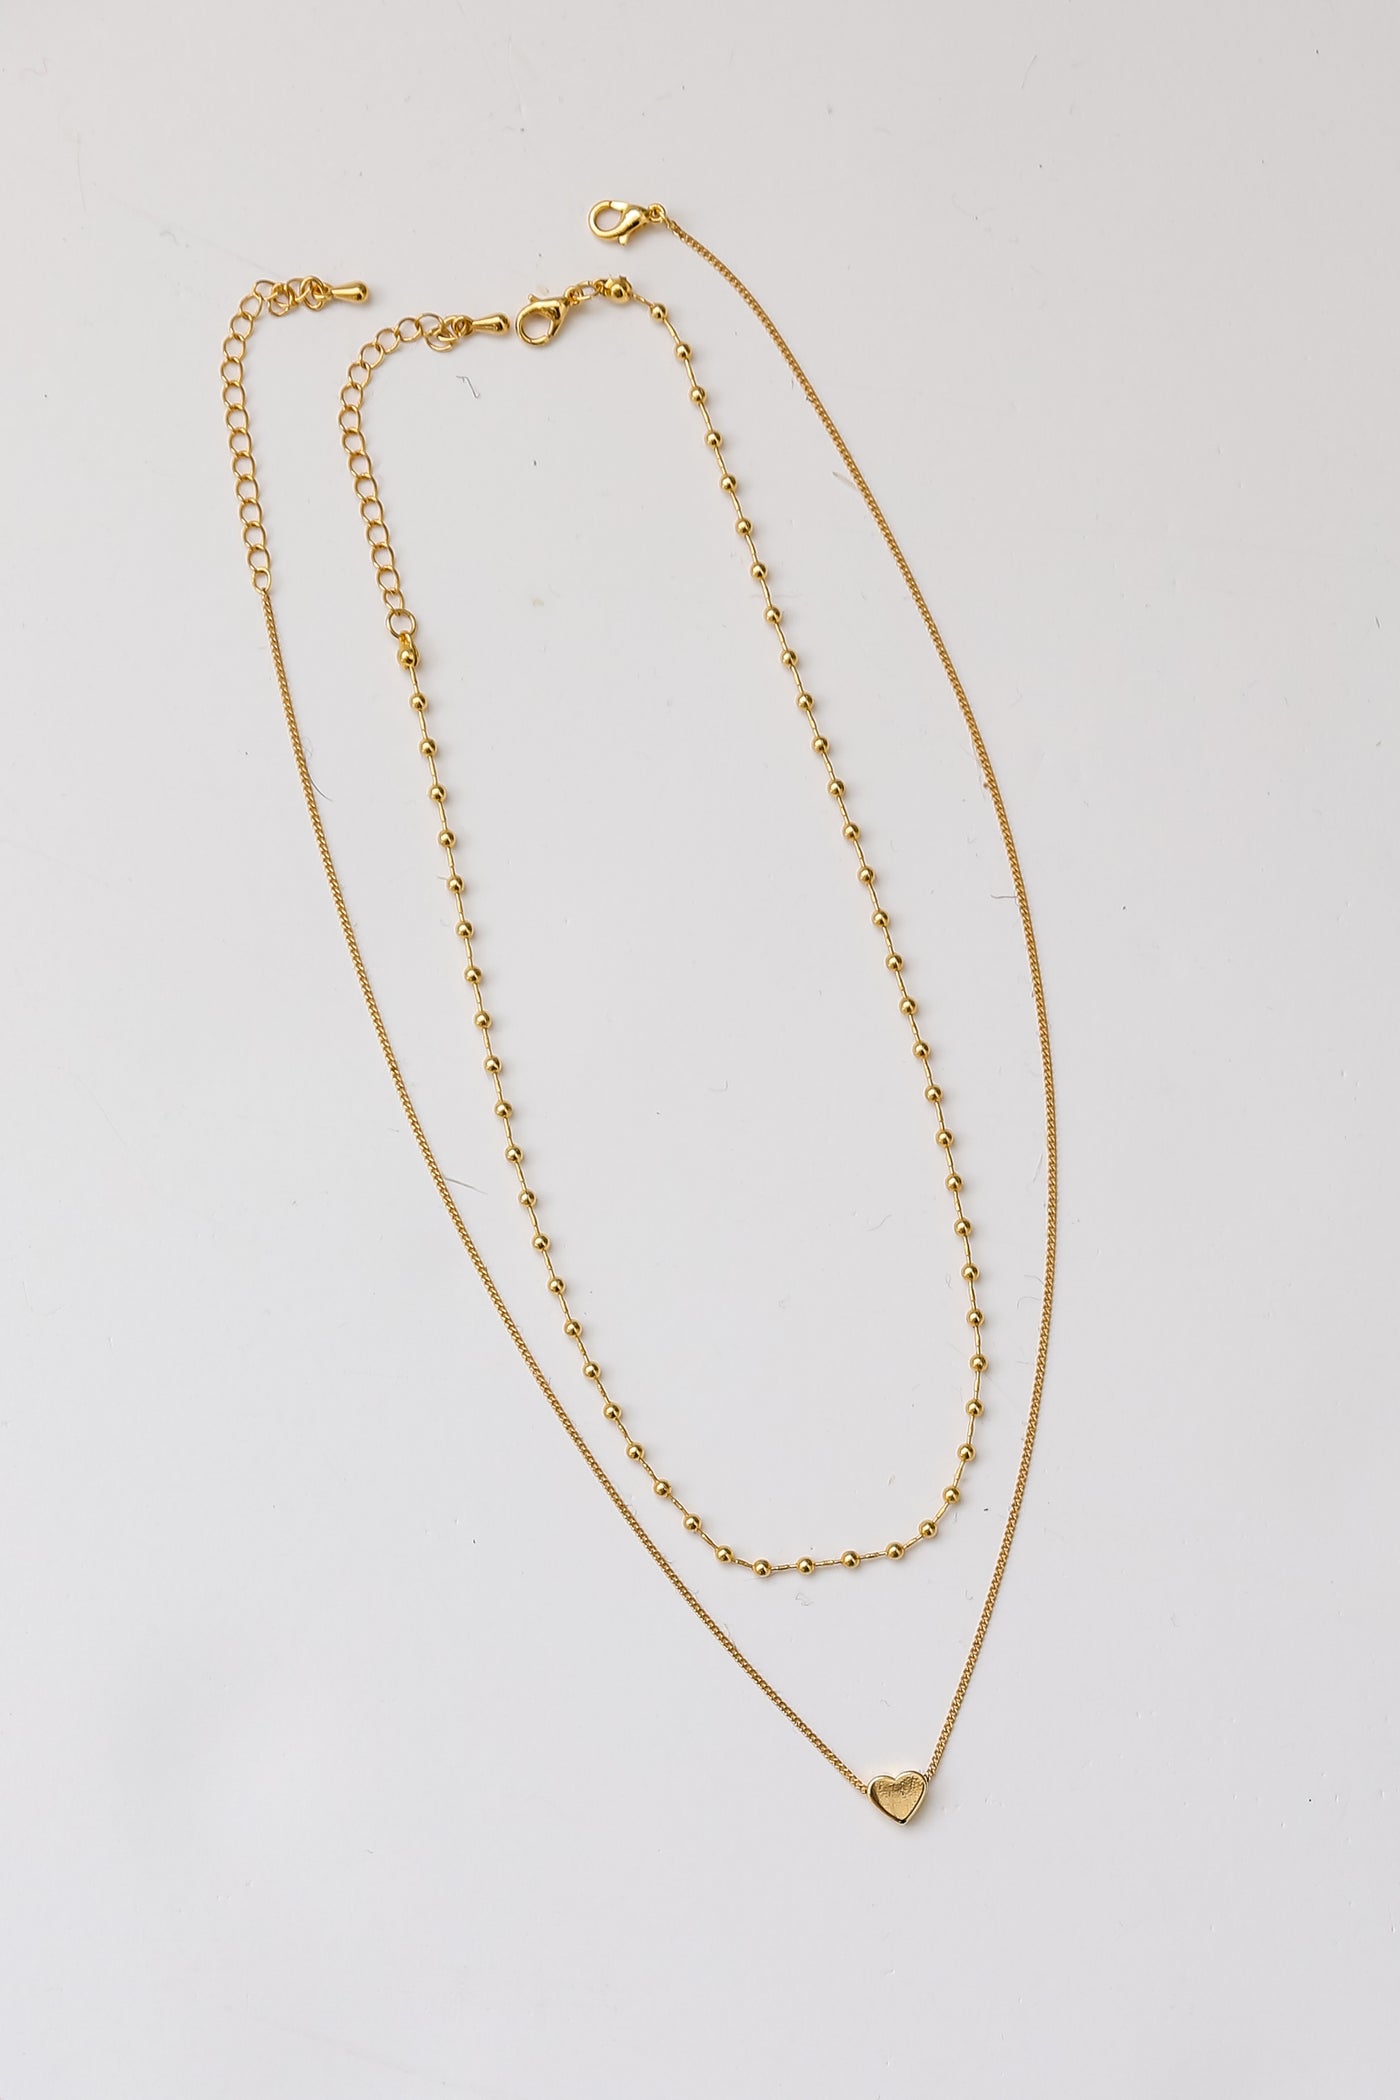 Gold Heart Charm Layered Necklace flat lay